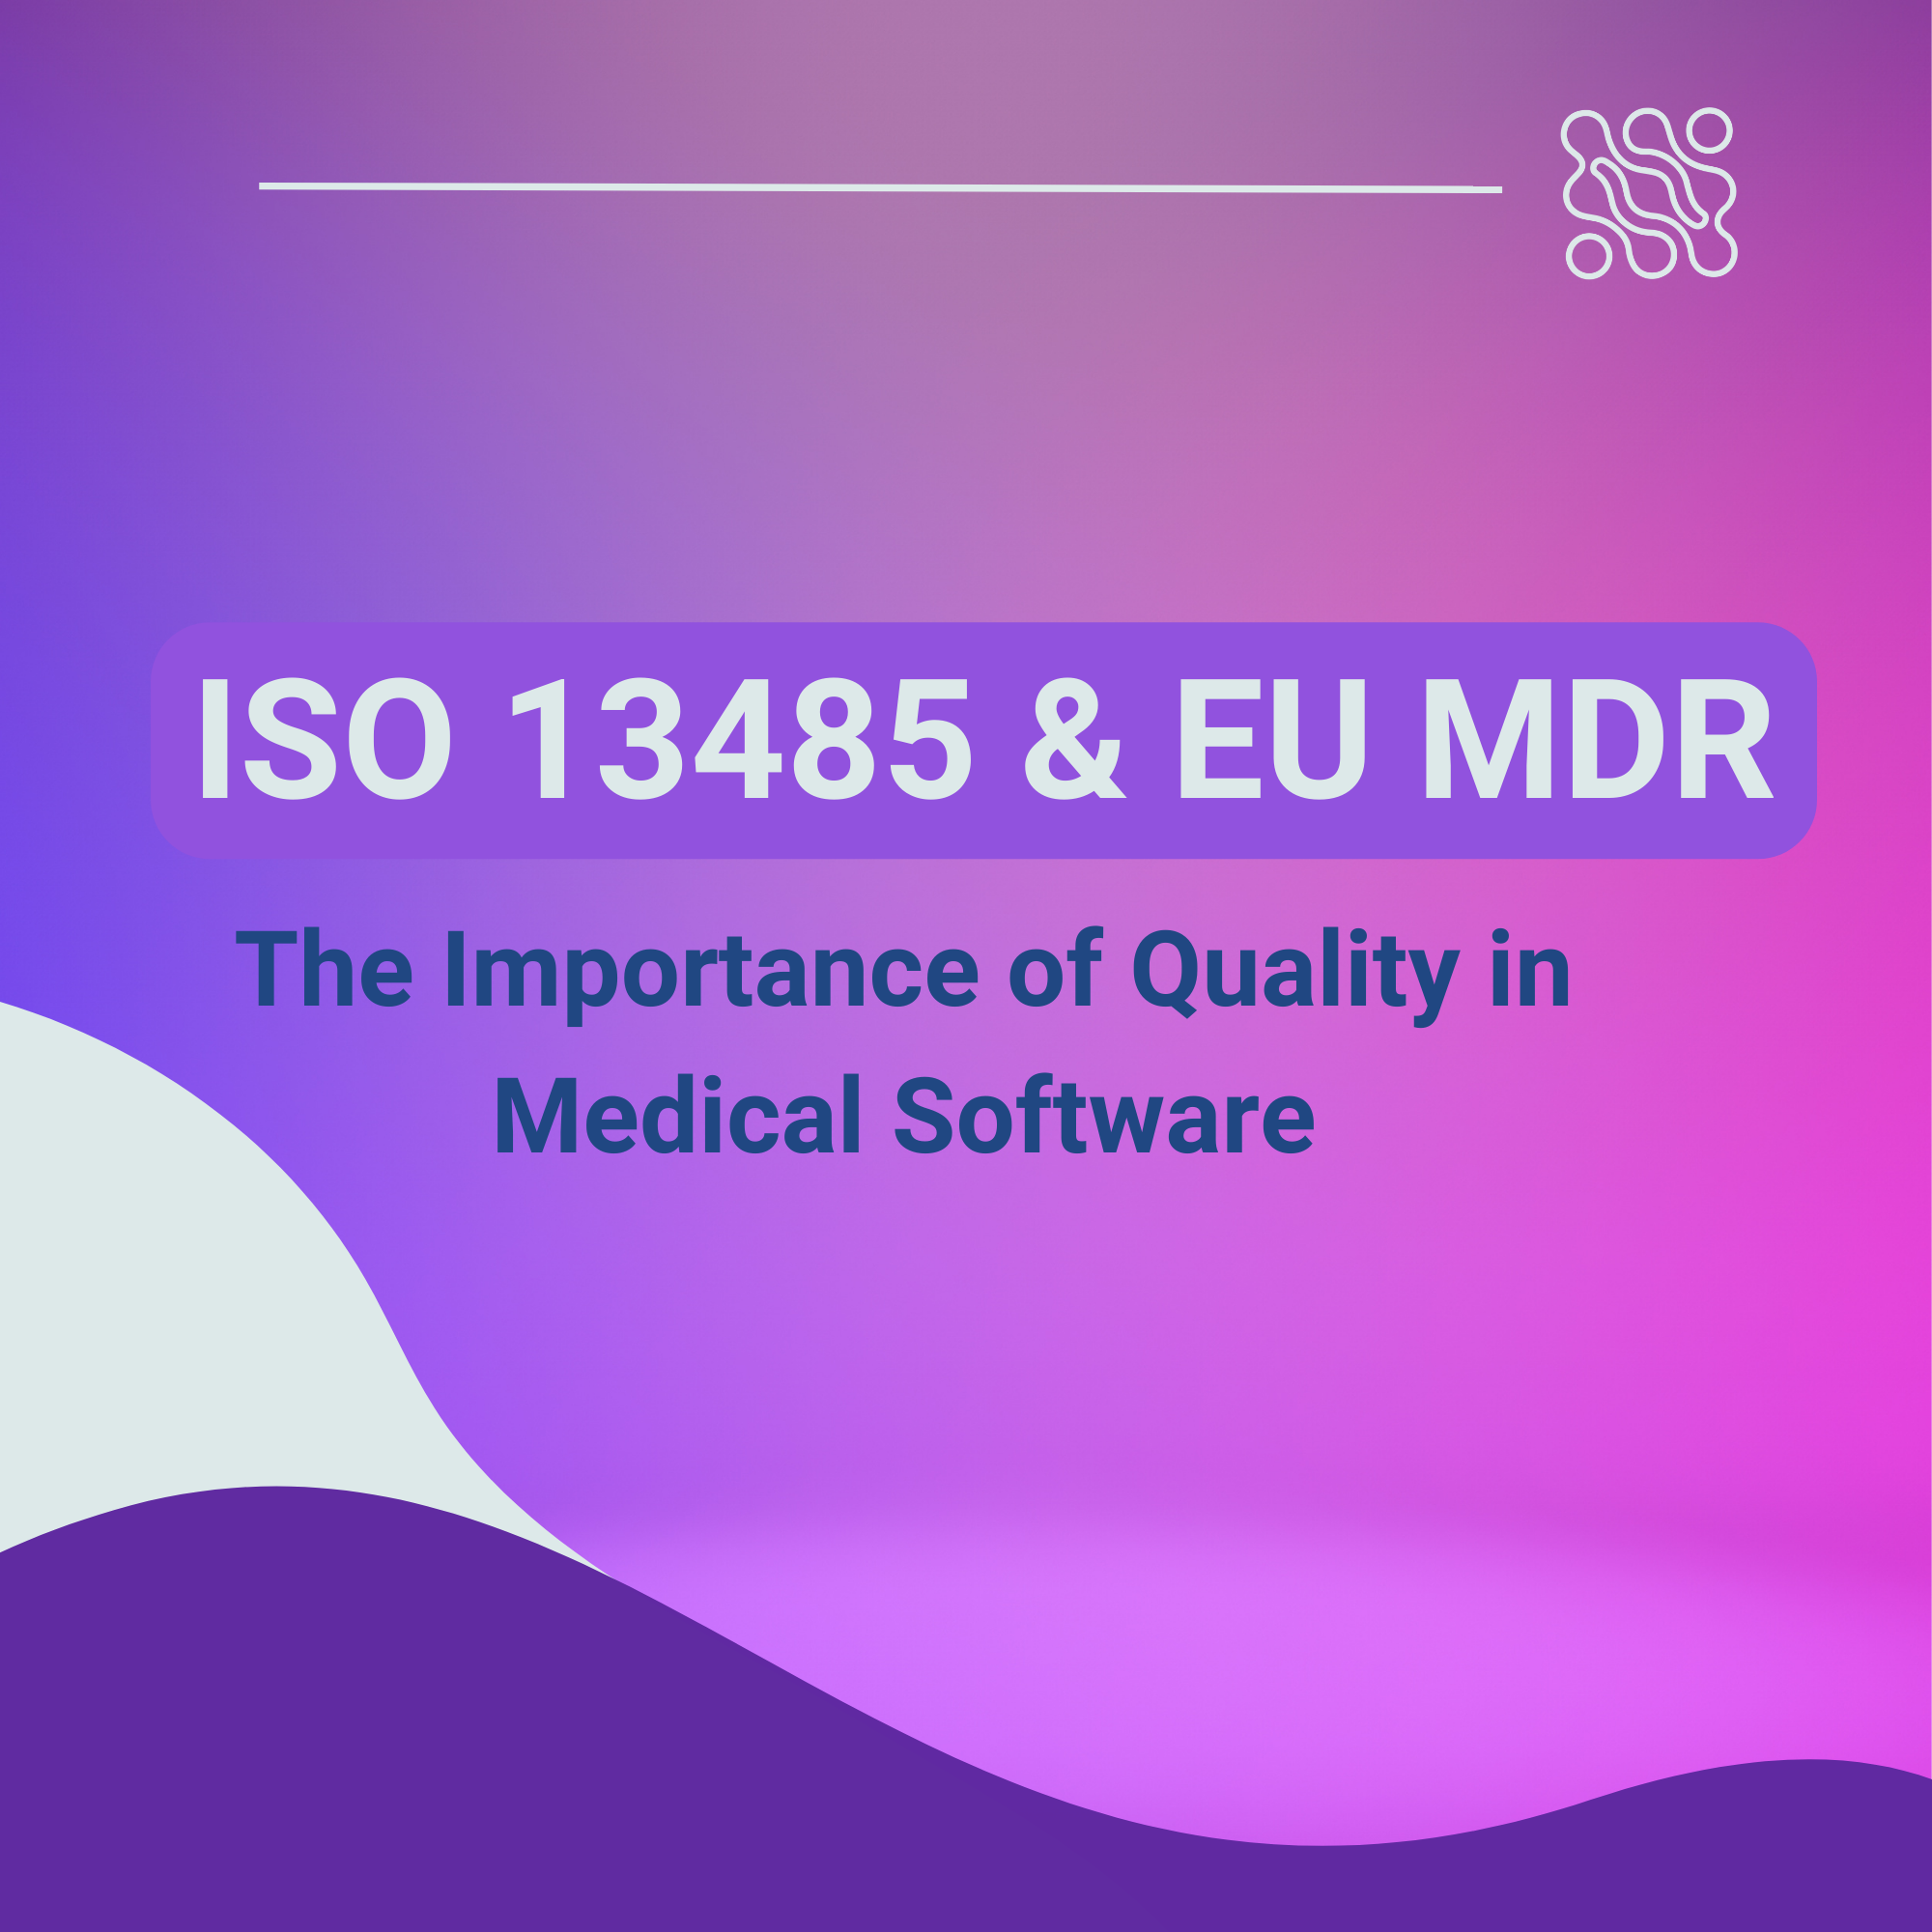 ISO 13485 and EU MDR The Importance of Quality in Medical Software